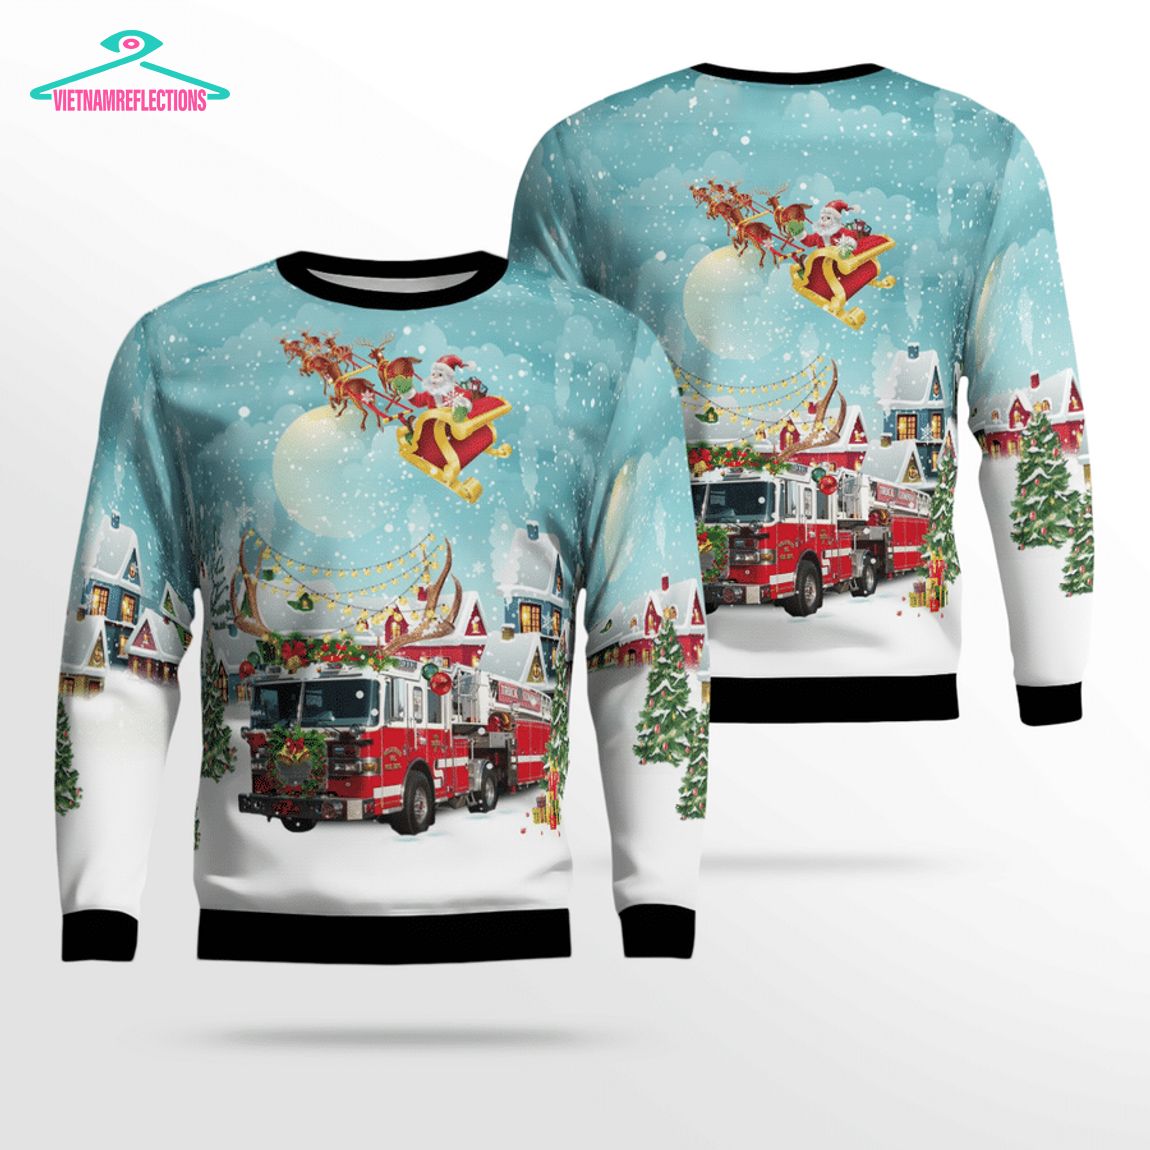 Hollywood Volunteer Fire Department Ver 2 3D Christmas Sweater - Wow, cute pie